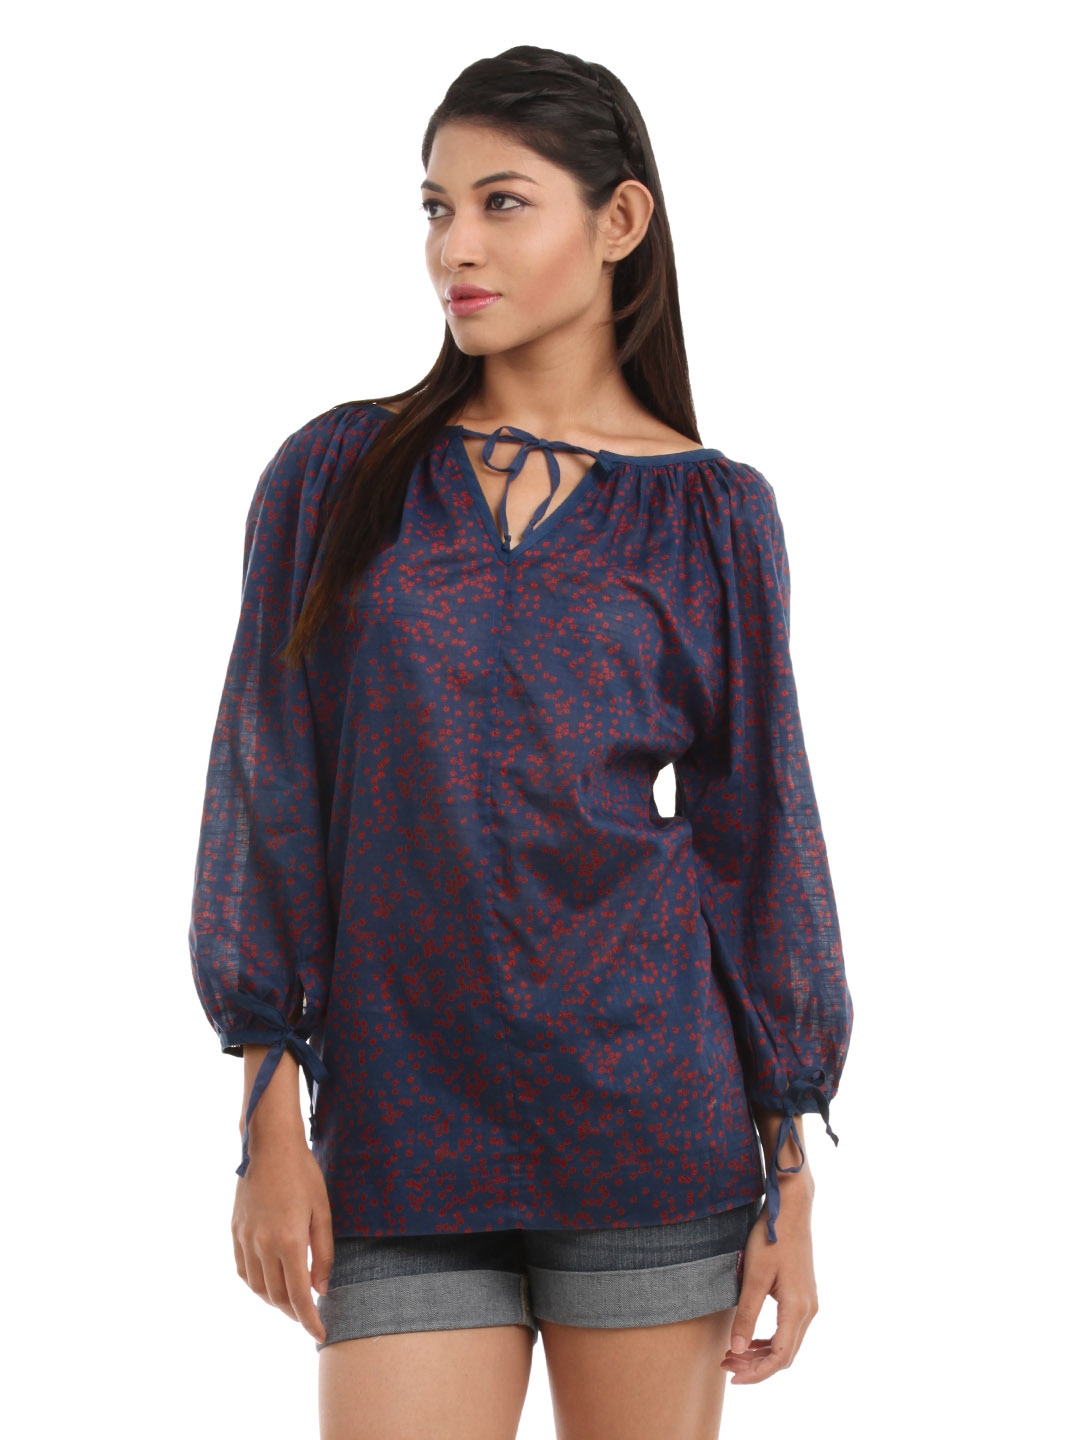 French Connection Women Navy Blue Printed Top